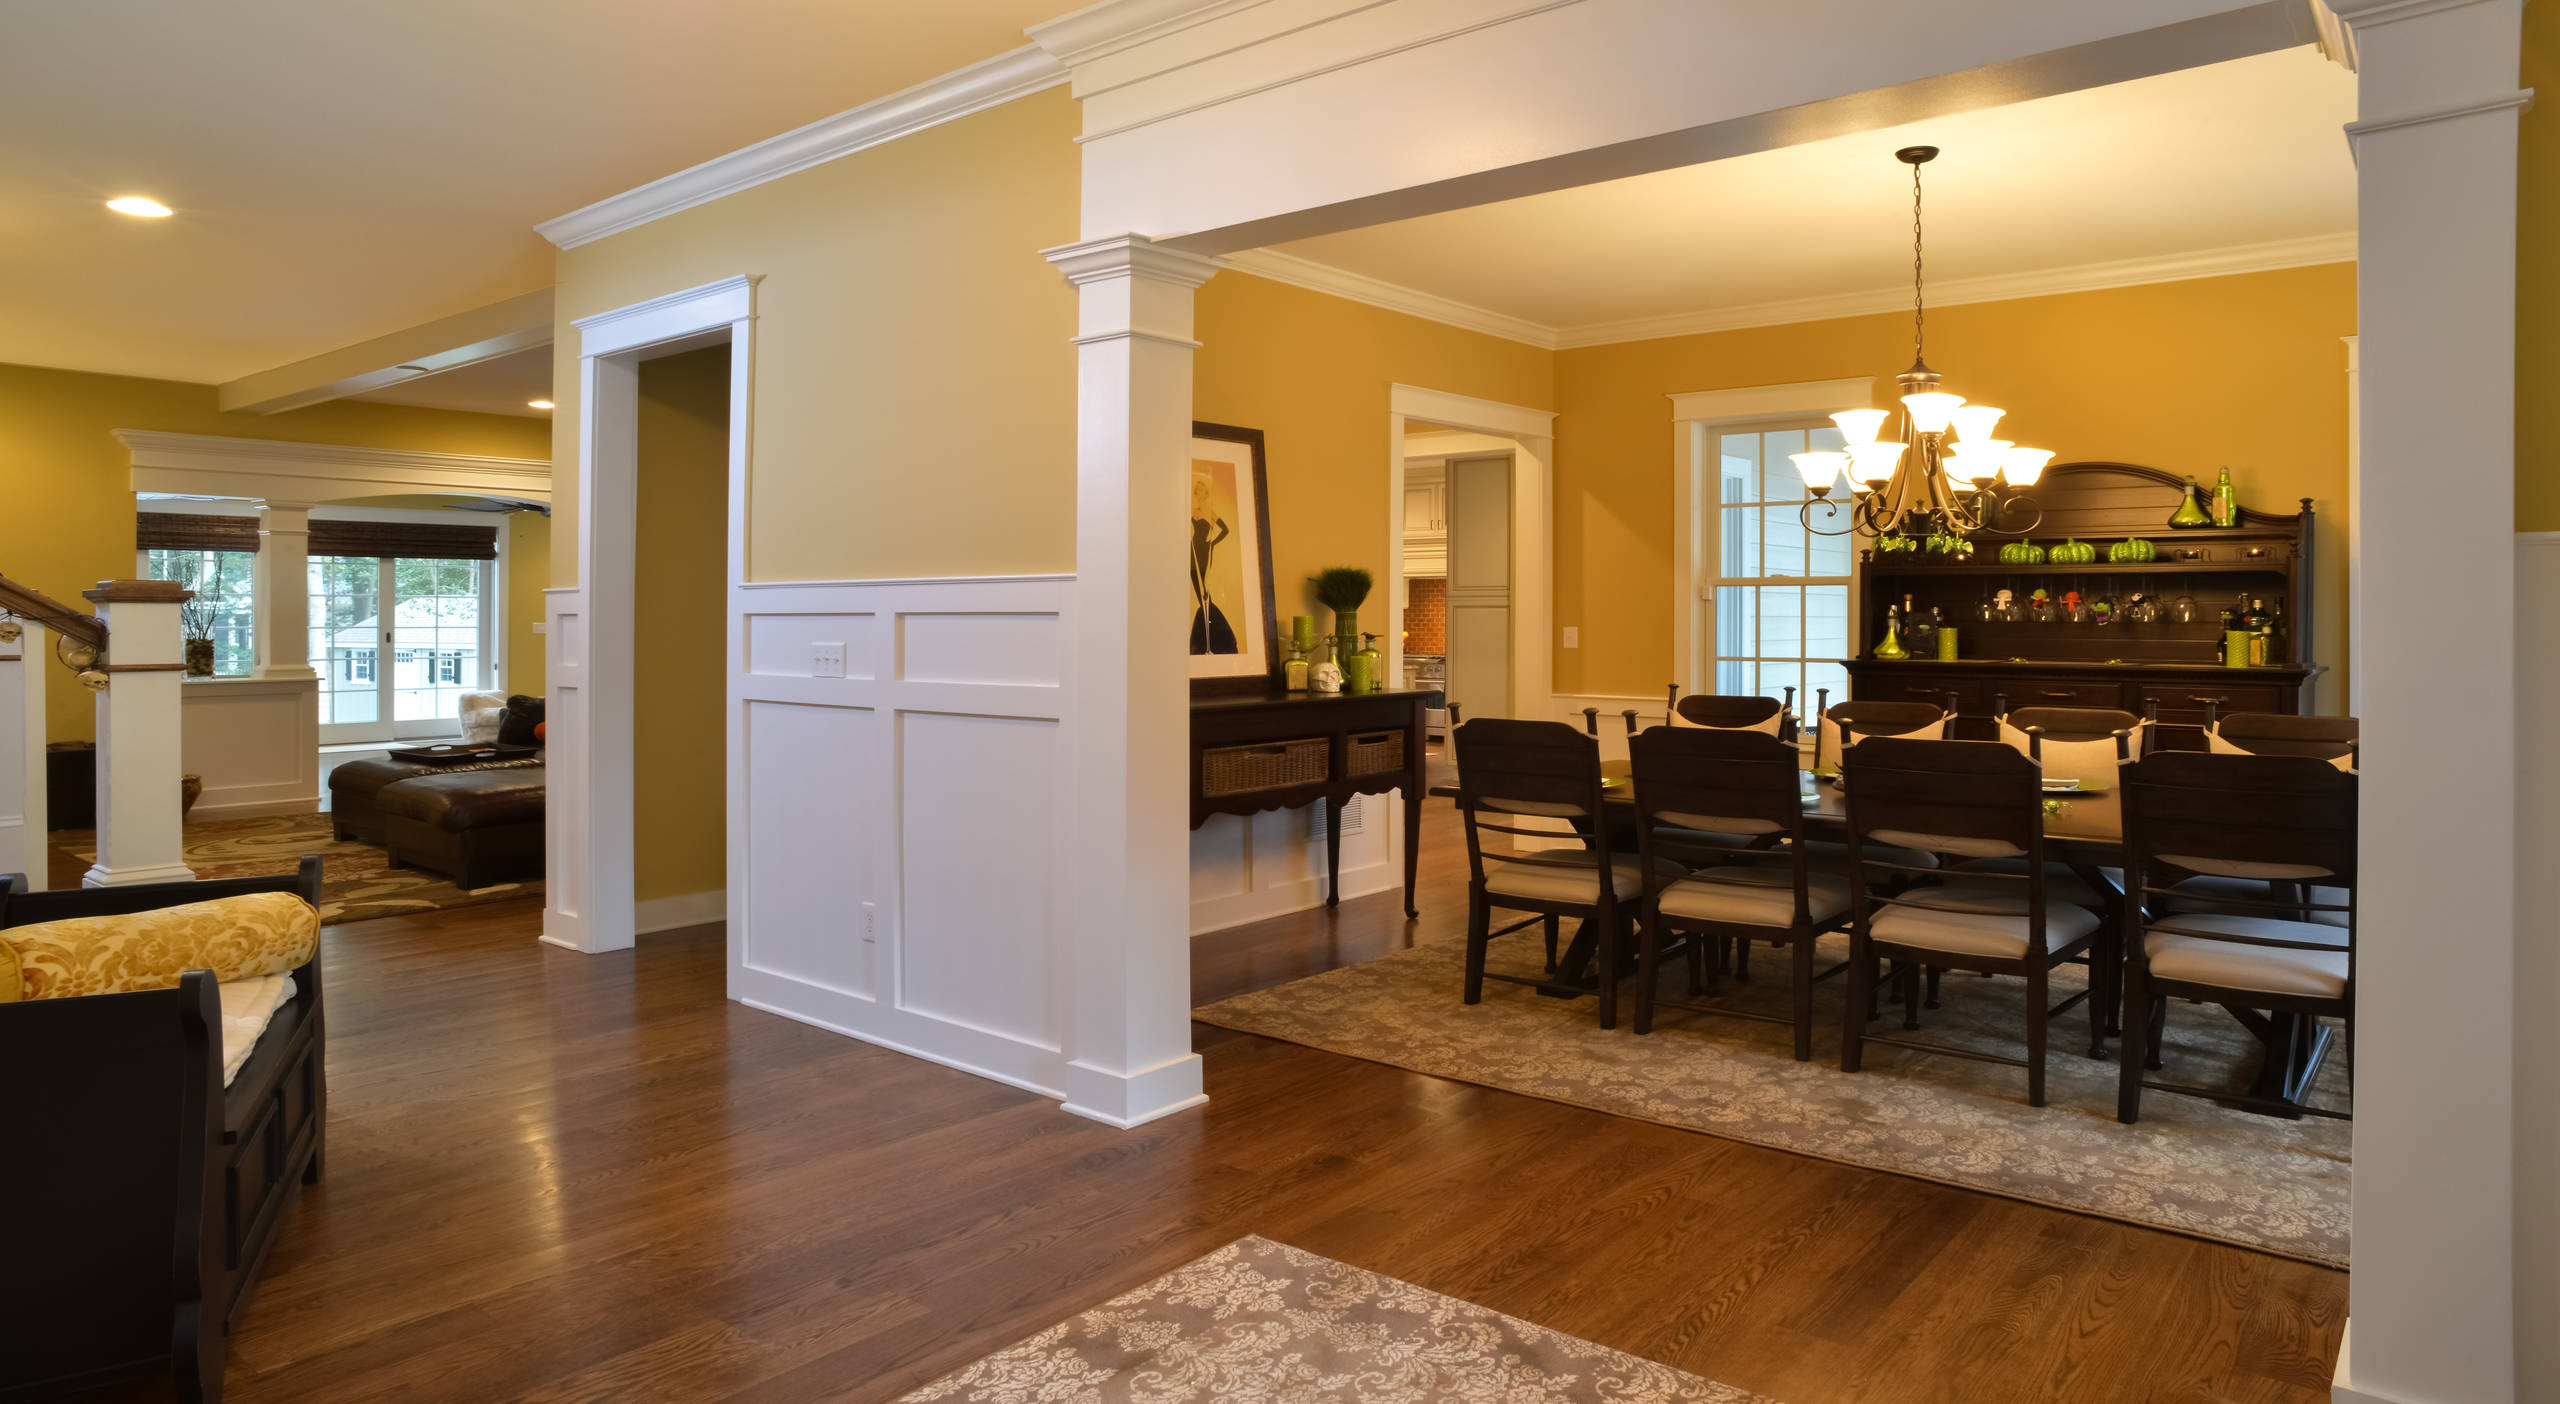 Elberton Way (SL-1561) by architect Mitchell Ginn - Traditional - Dining  Room - DC Metro - by The Lewes Building Company | Houzz